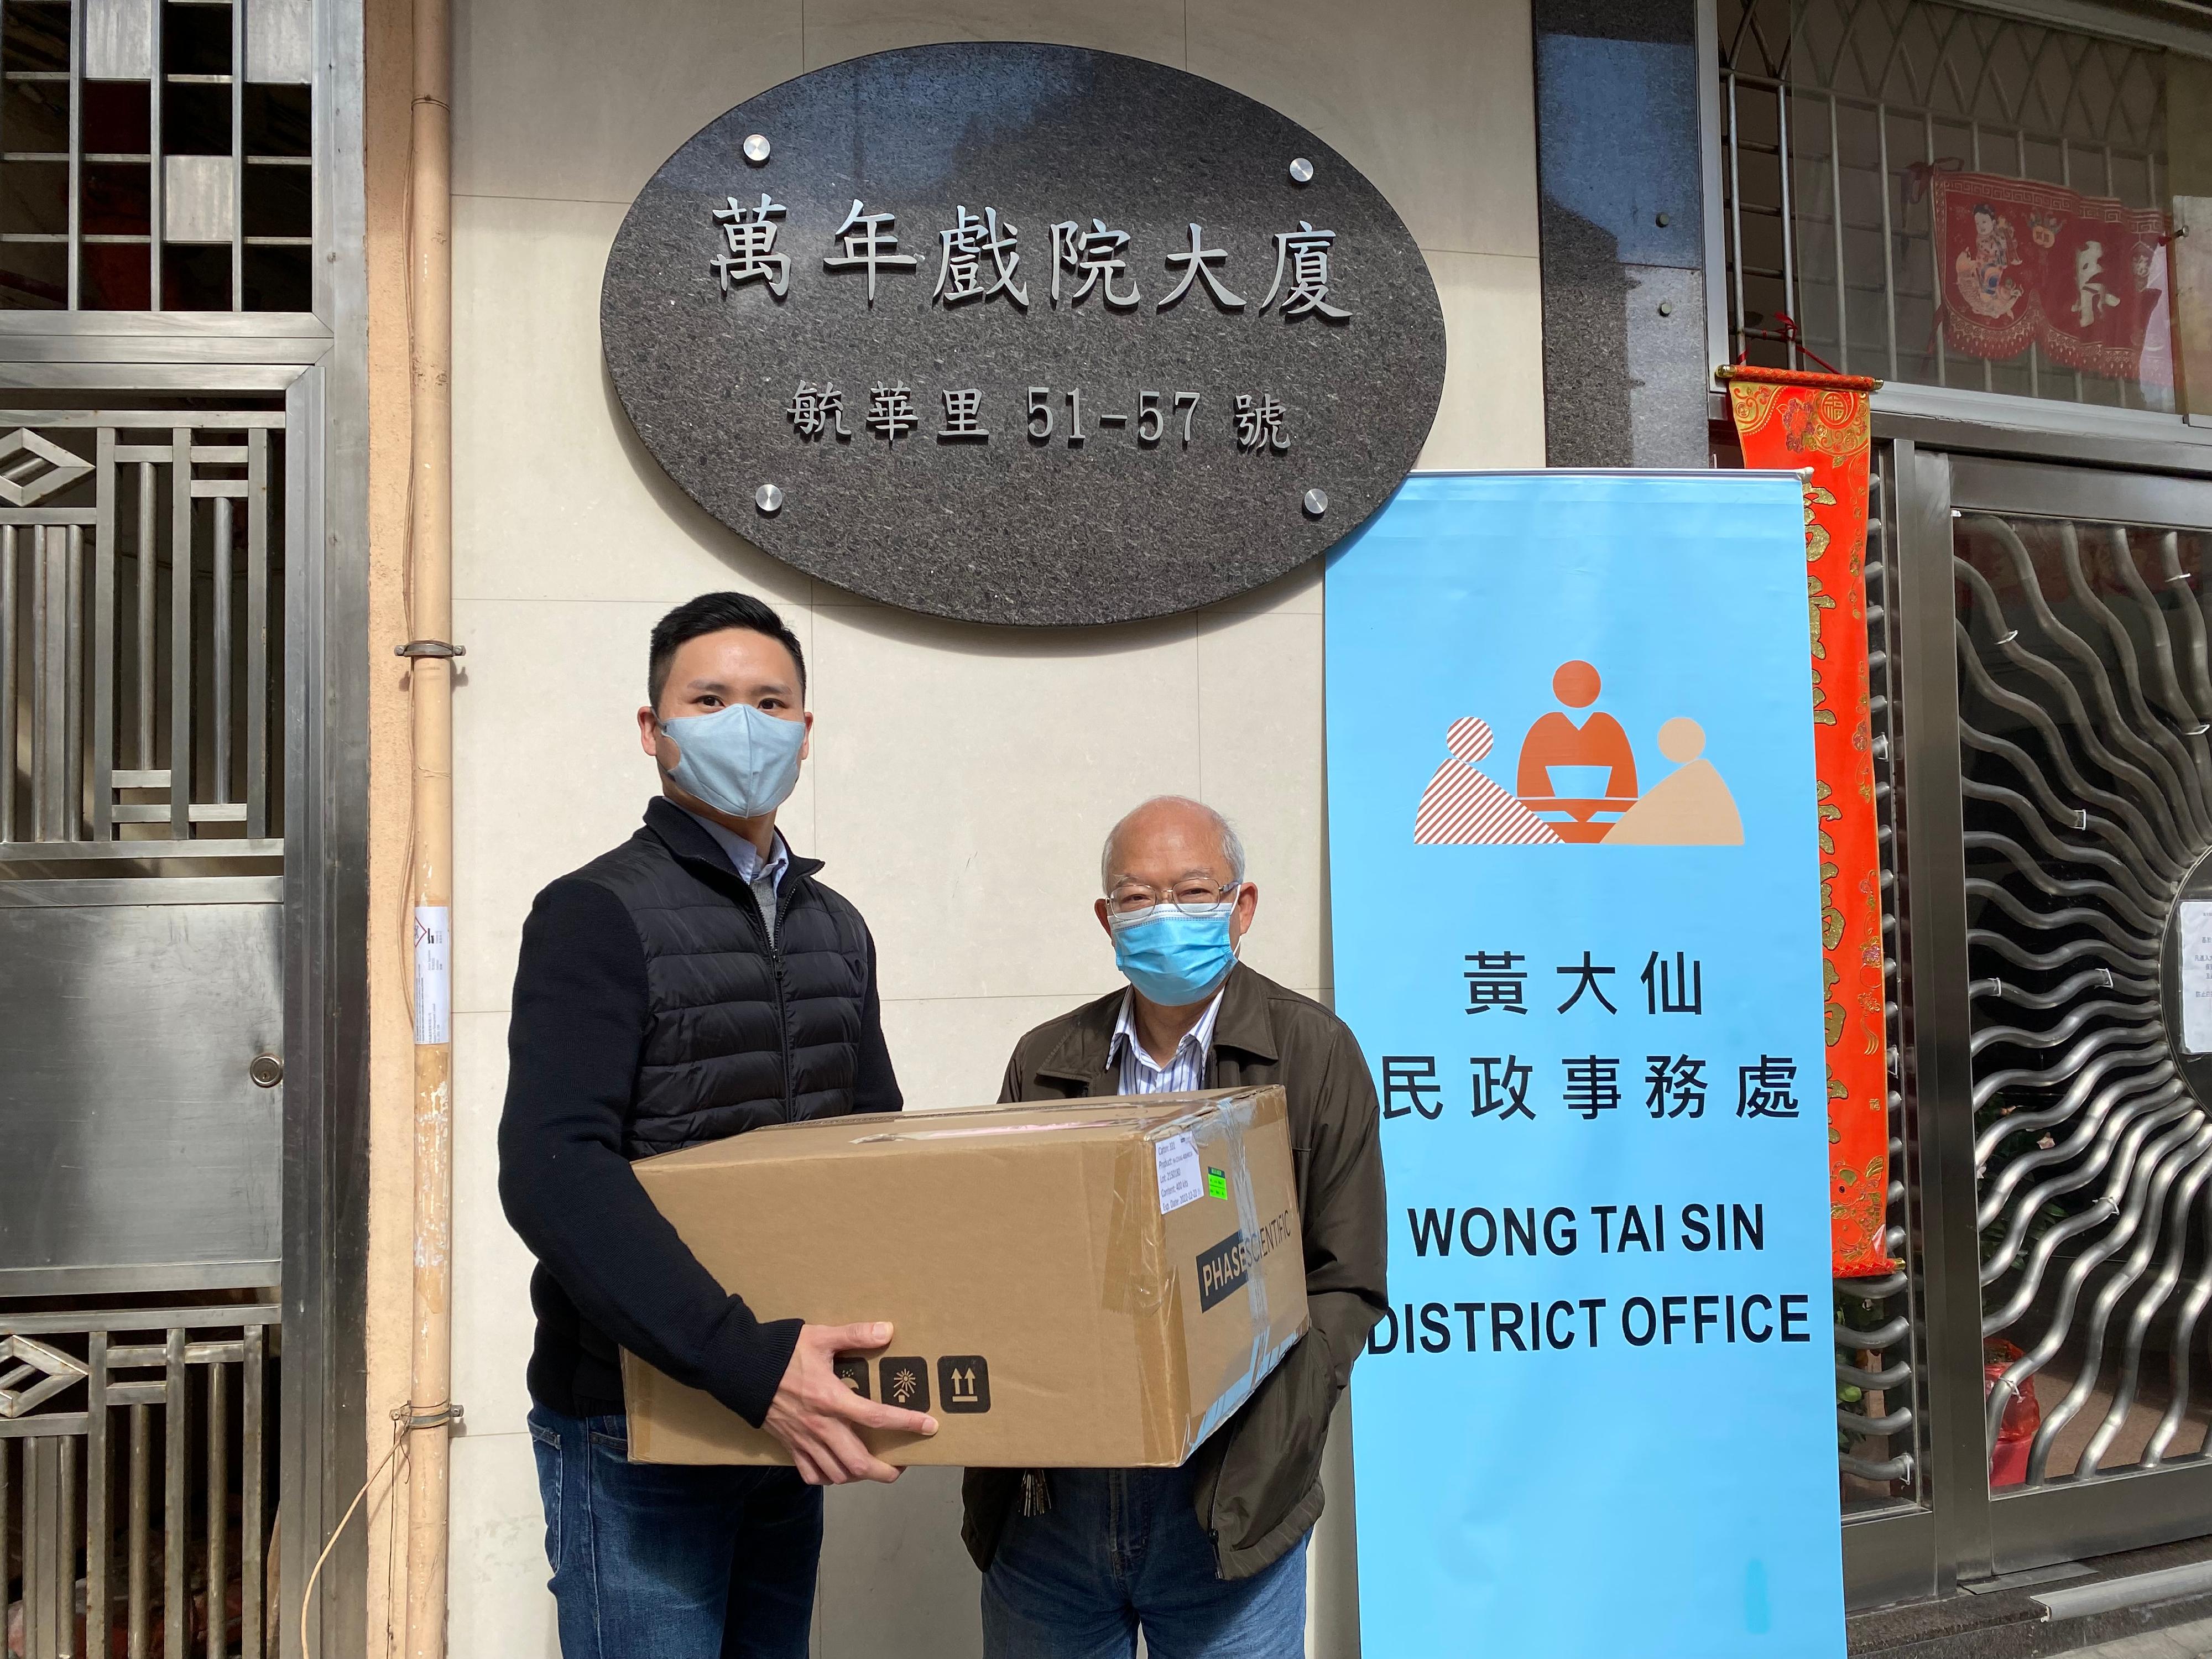 The Wong Tai Sin District Office today (February 8) distributed COVID-19 rapid test kits to households, cleansing workers and property management staff living and working in the area around Po Kong Village Road, Yuk Wah Crescent and Yuk Wah Street in Wong Tai Sin for voluntary testing through property management companies.